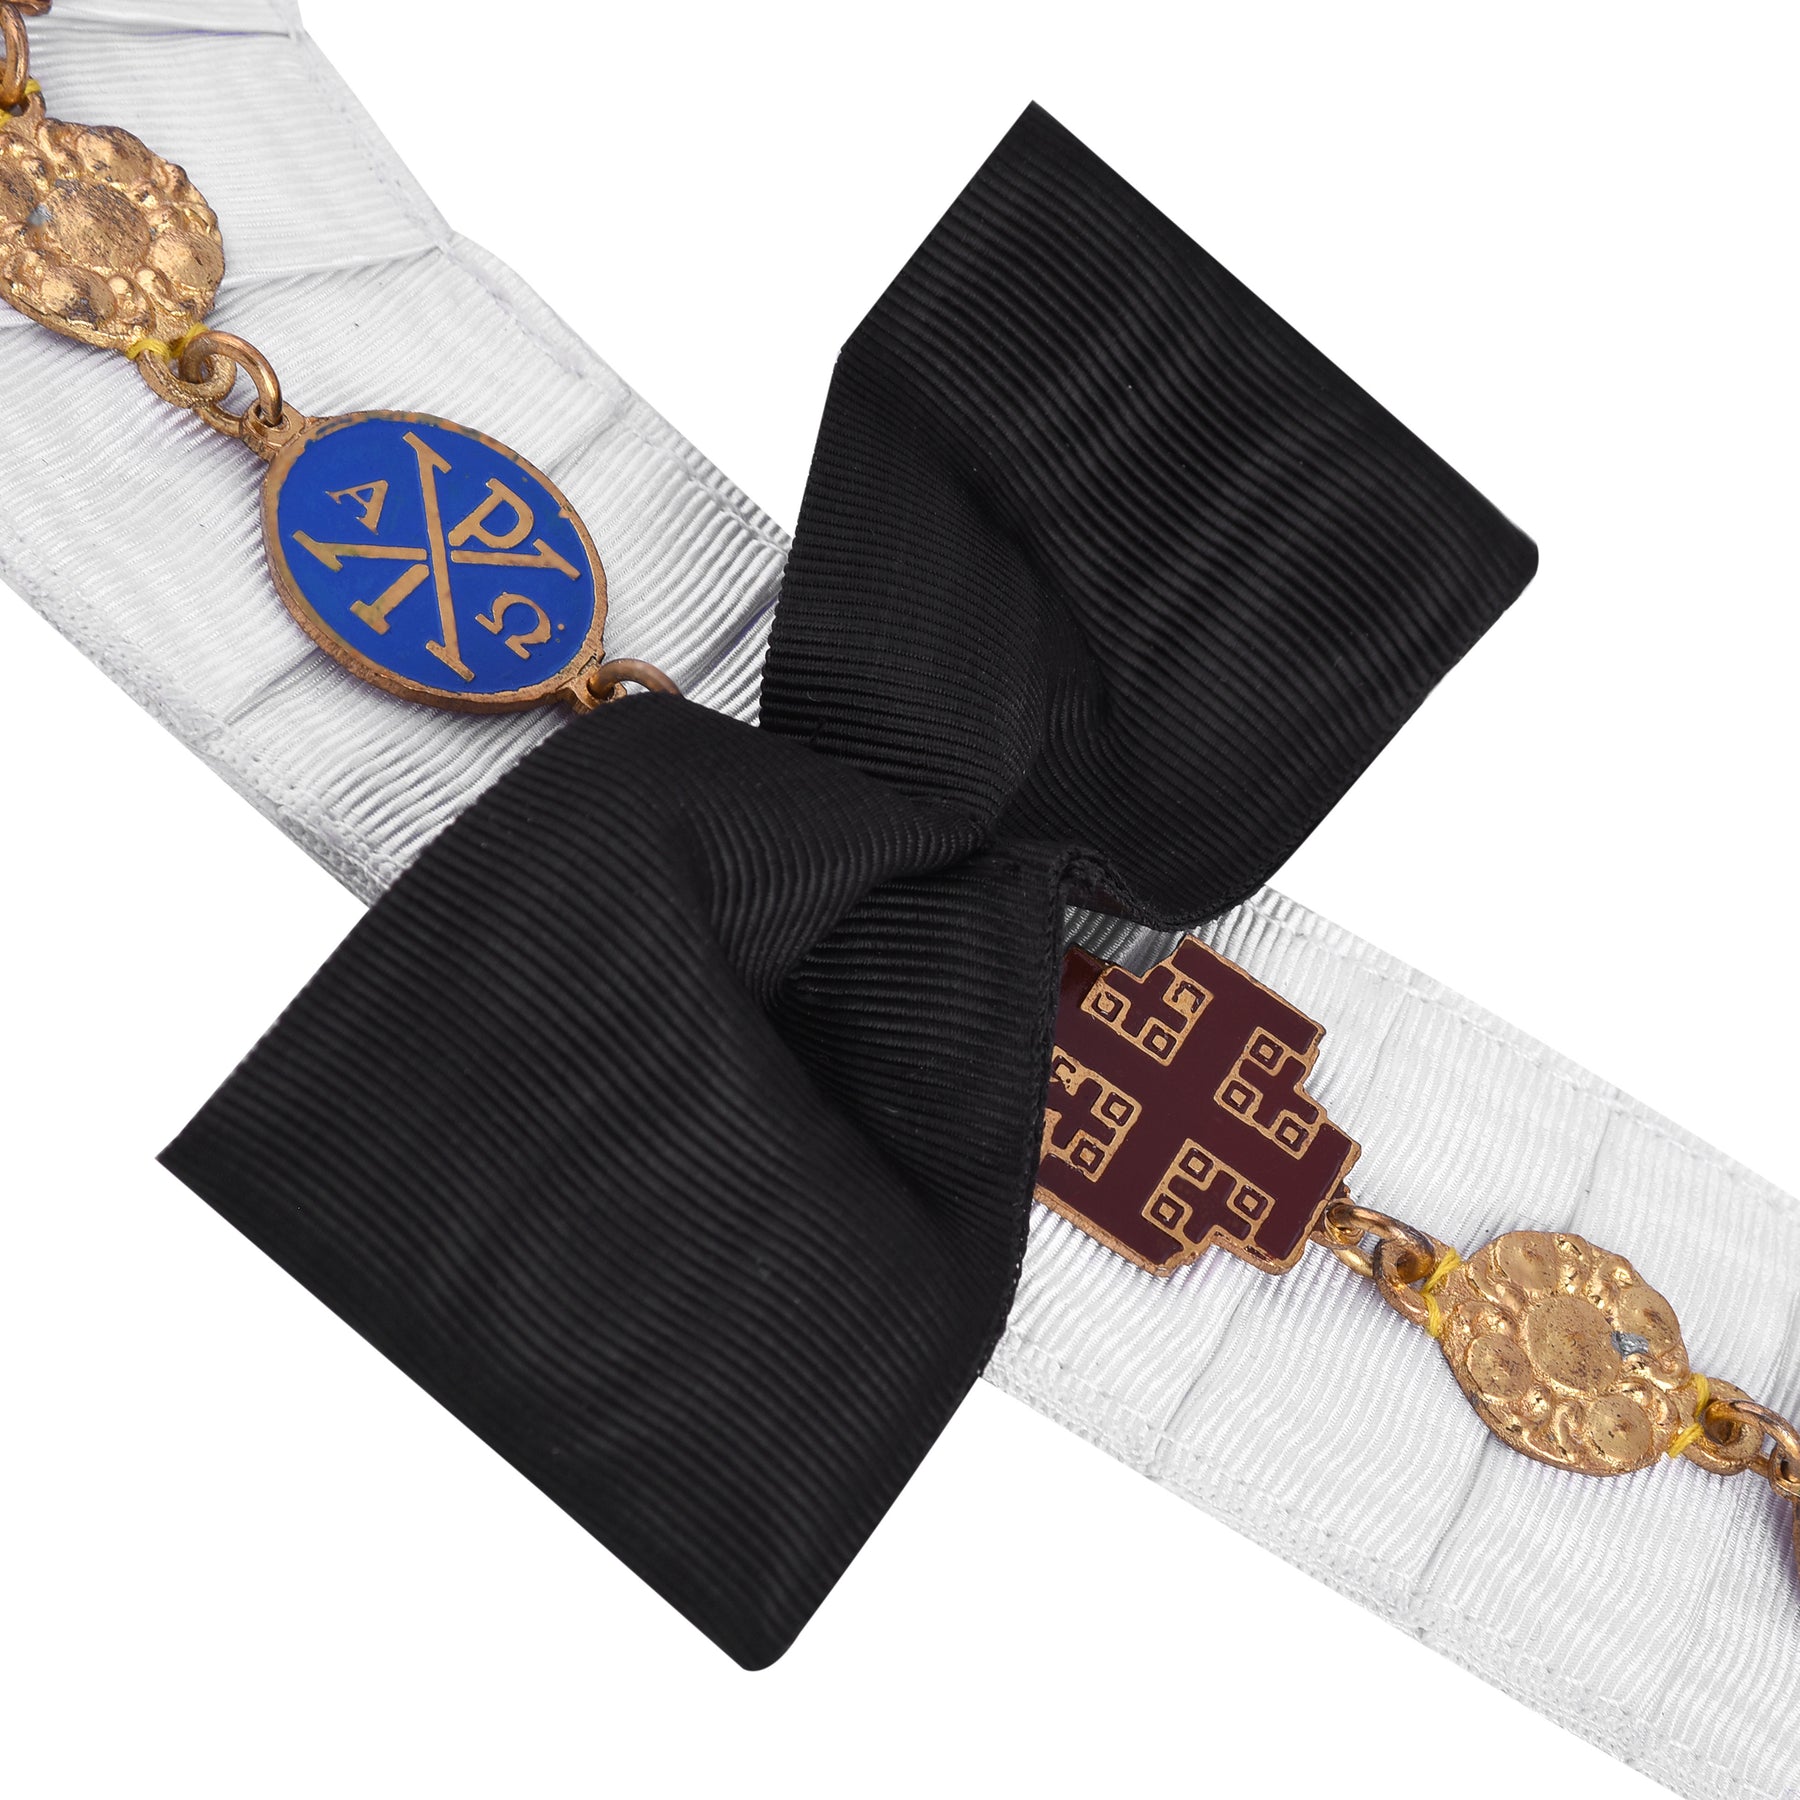 Knight Commander Red Cross of Constantine Chain Collar - Gold Plated Jewels - Bricks Masons